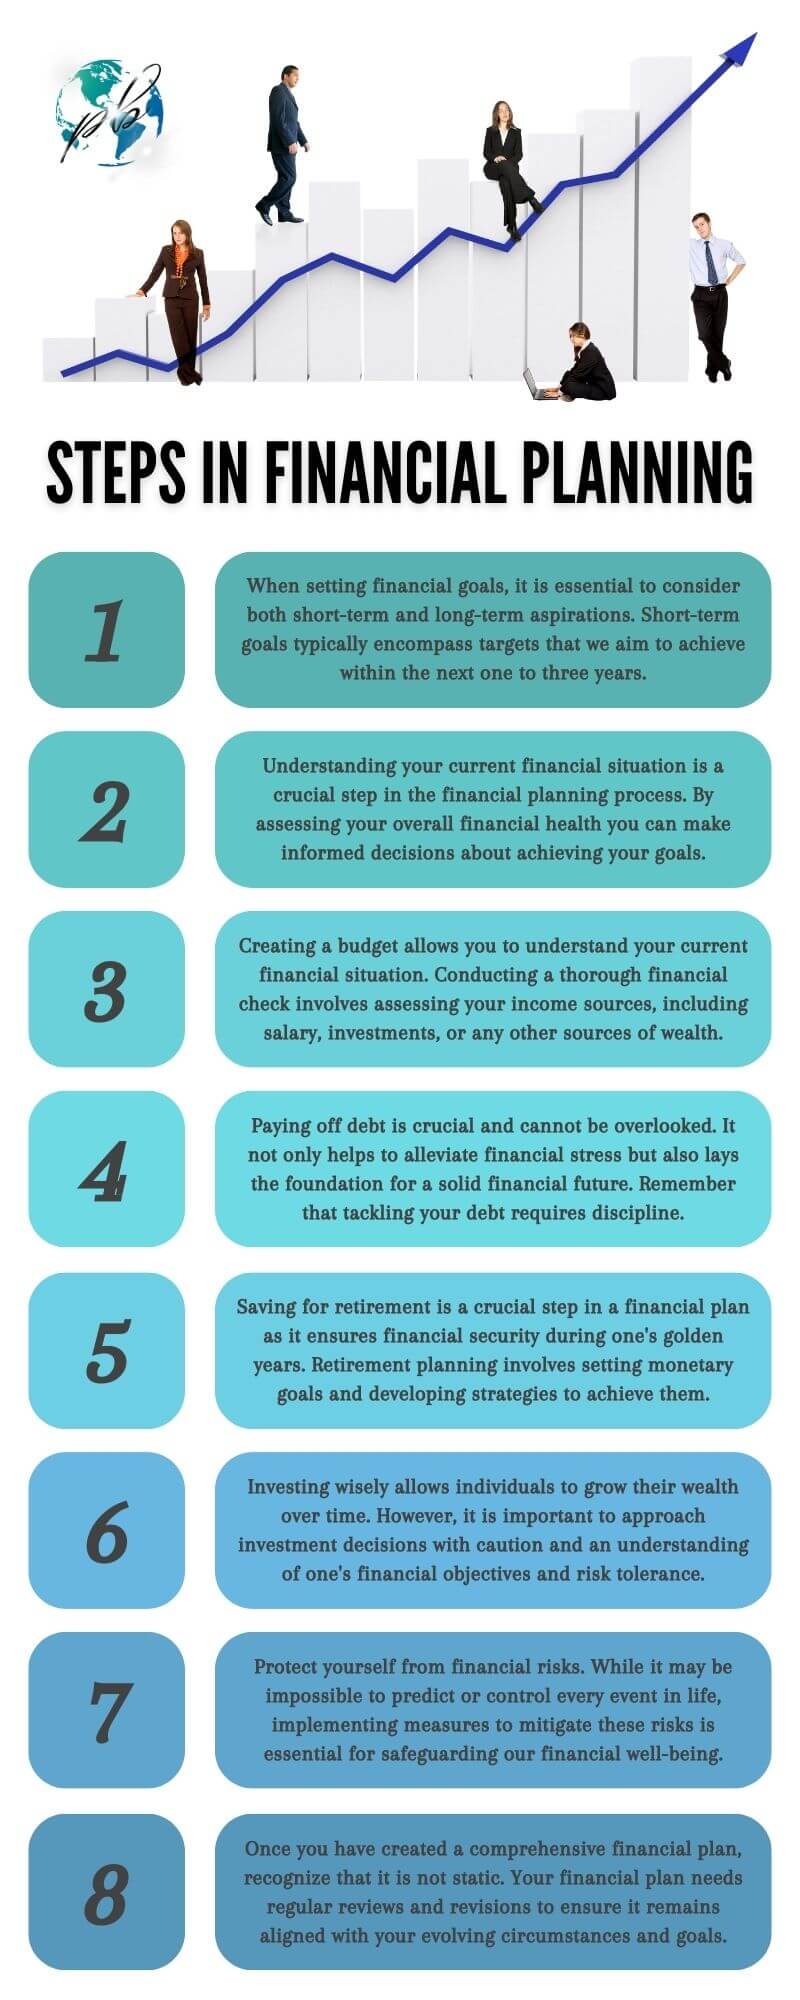 8 steps to financial planning infographic